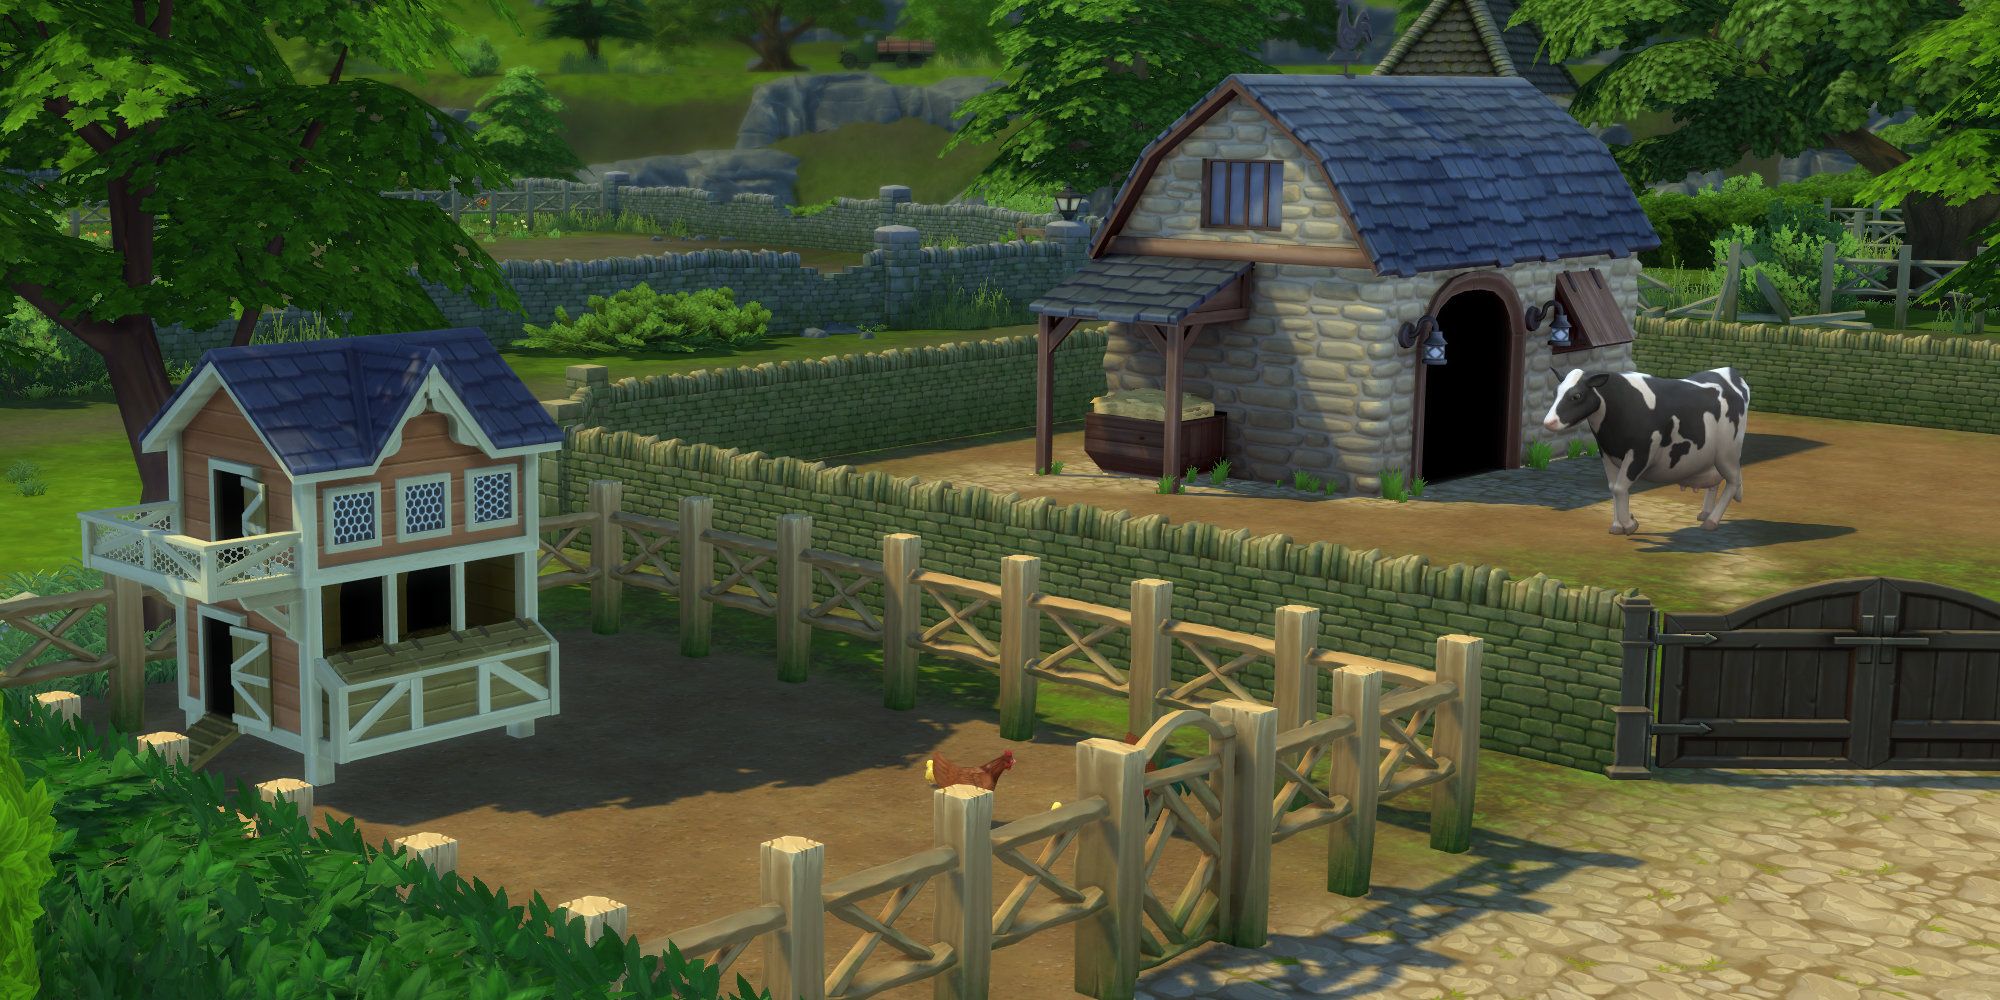 The Sims 4 Cottage Living Preview Cows And Llamas And Chickens Oh My!